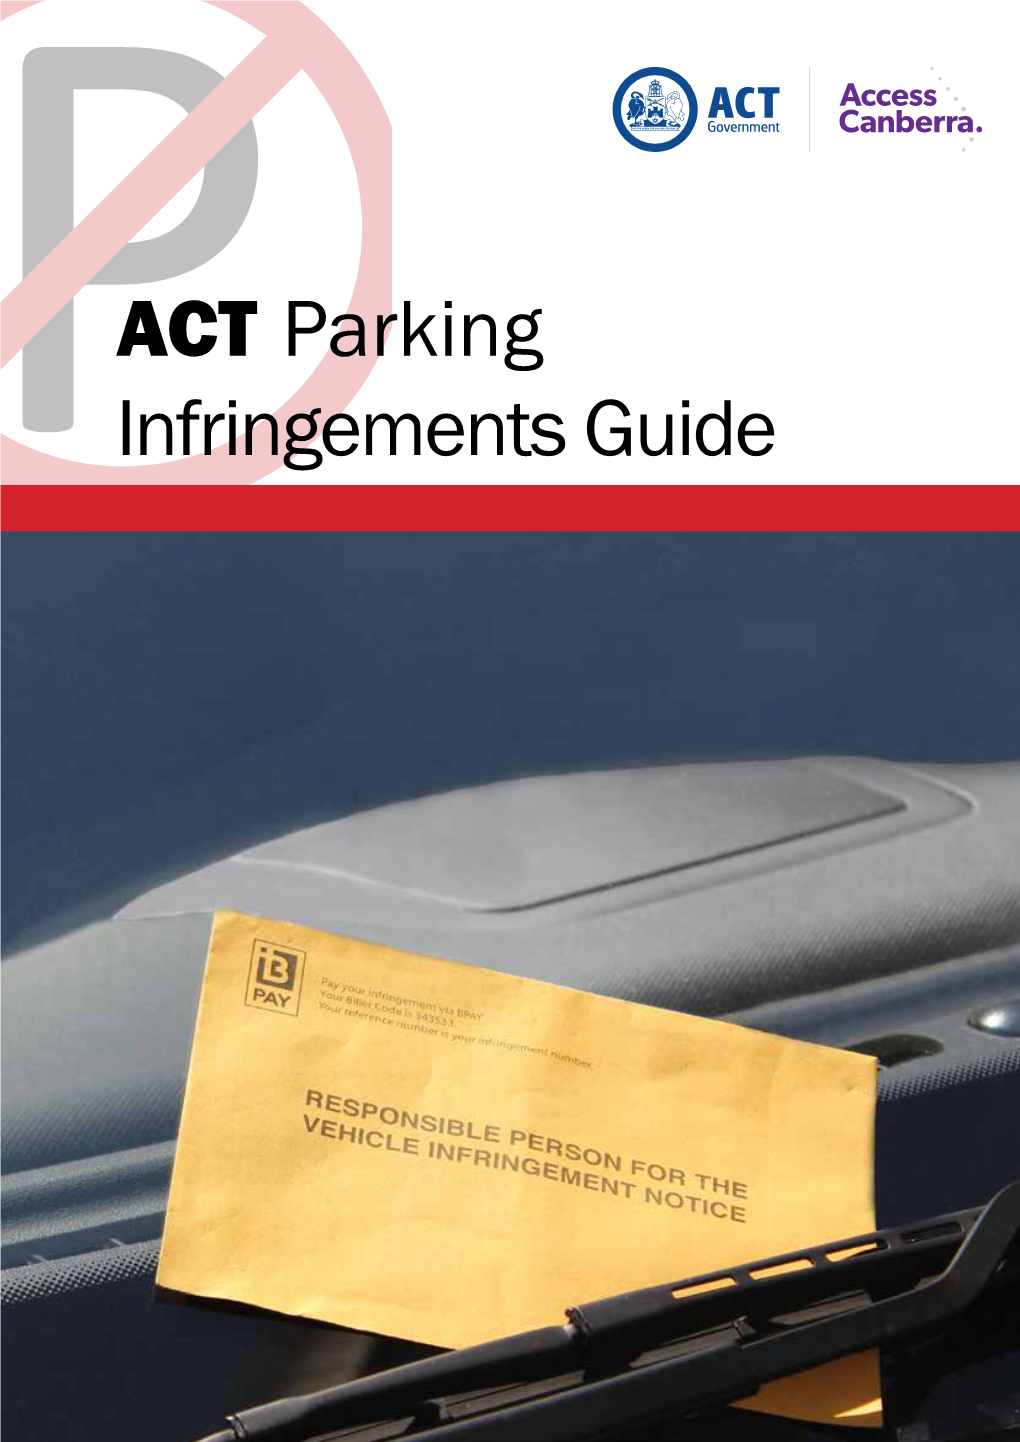 ACT Parking Infringements Guide